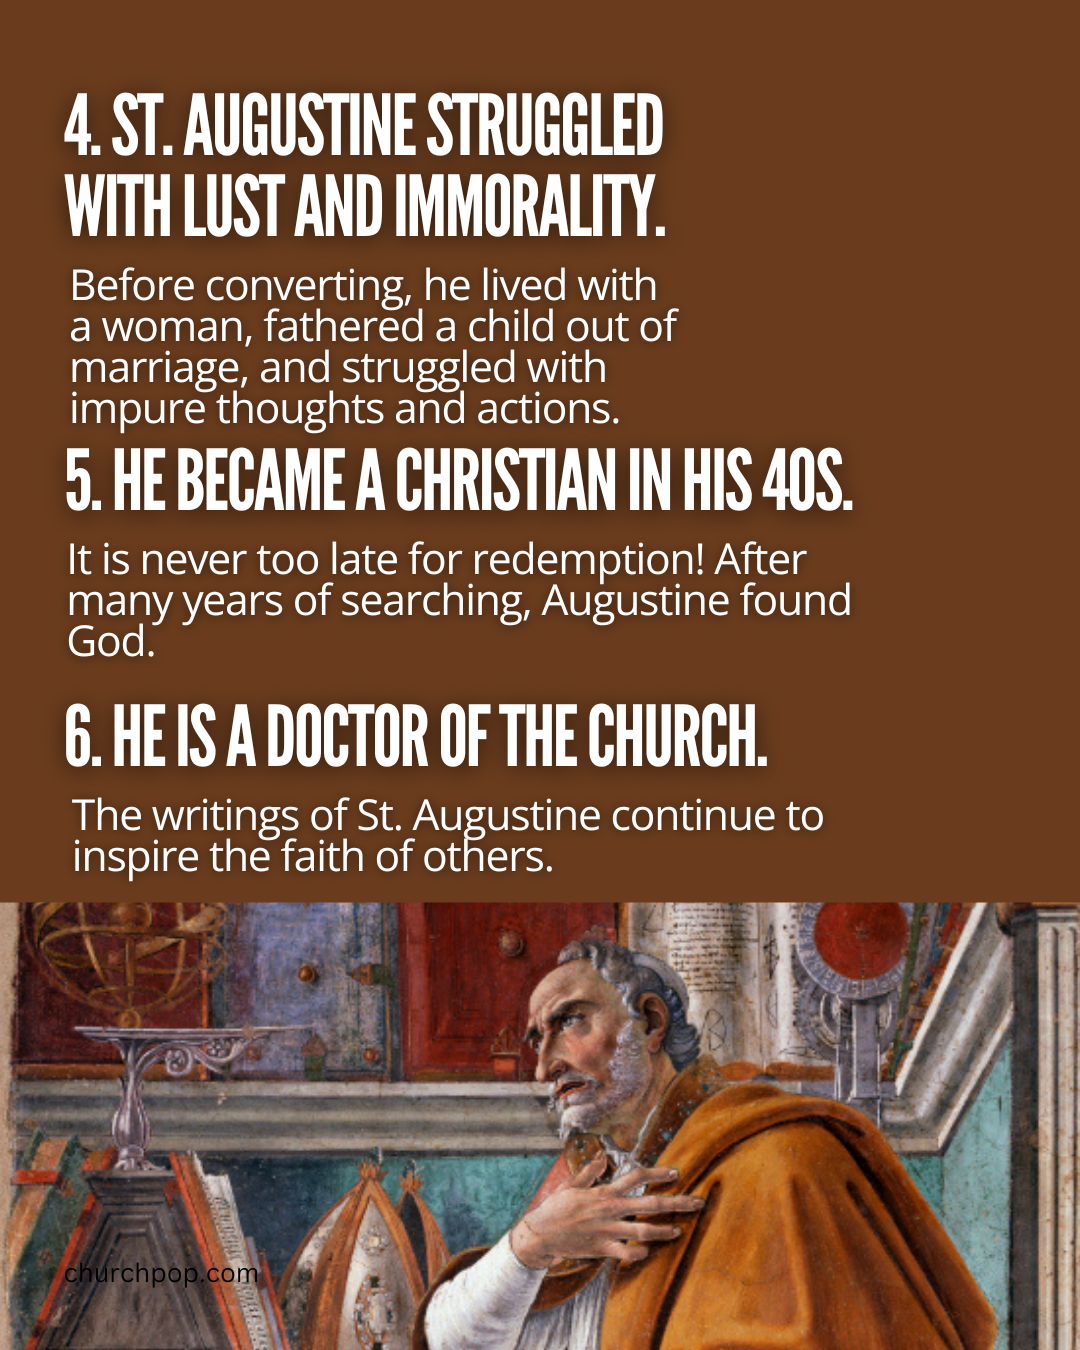 Who is Saint Augustine?